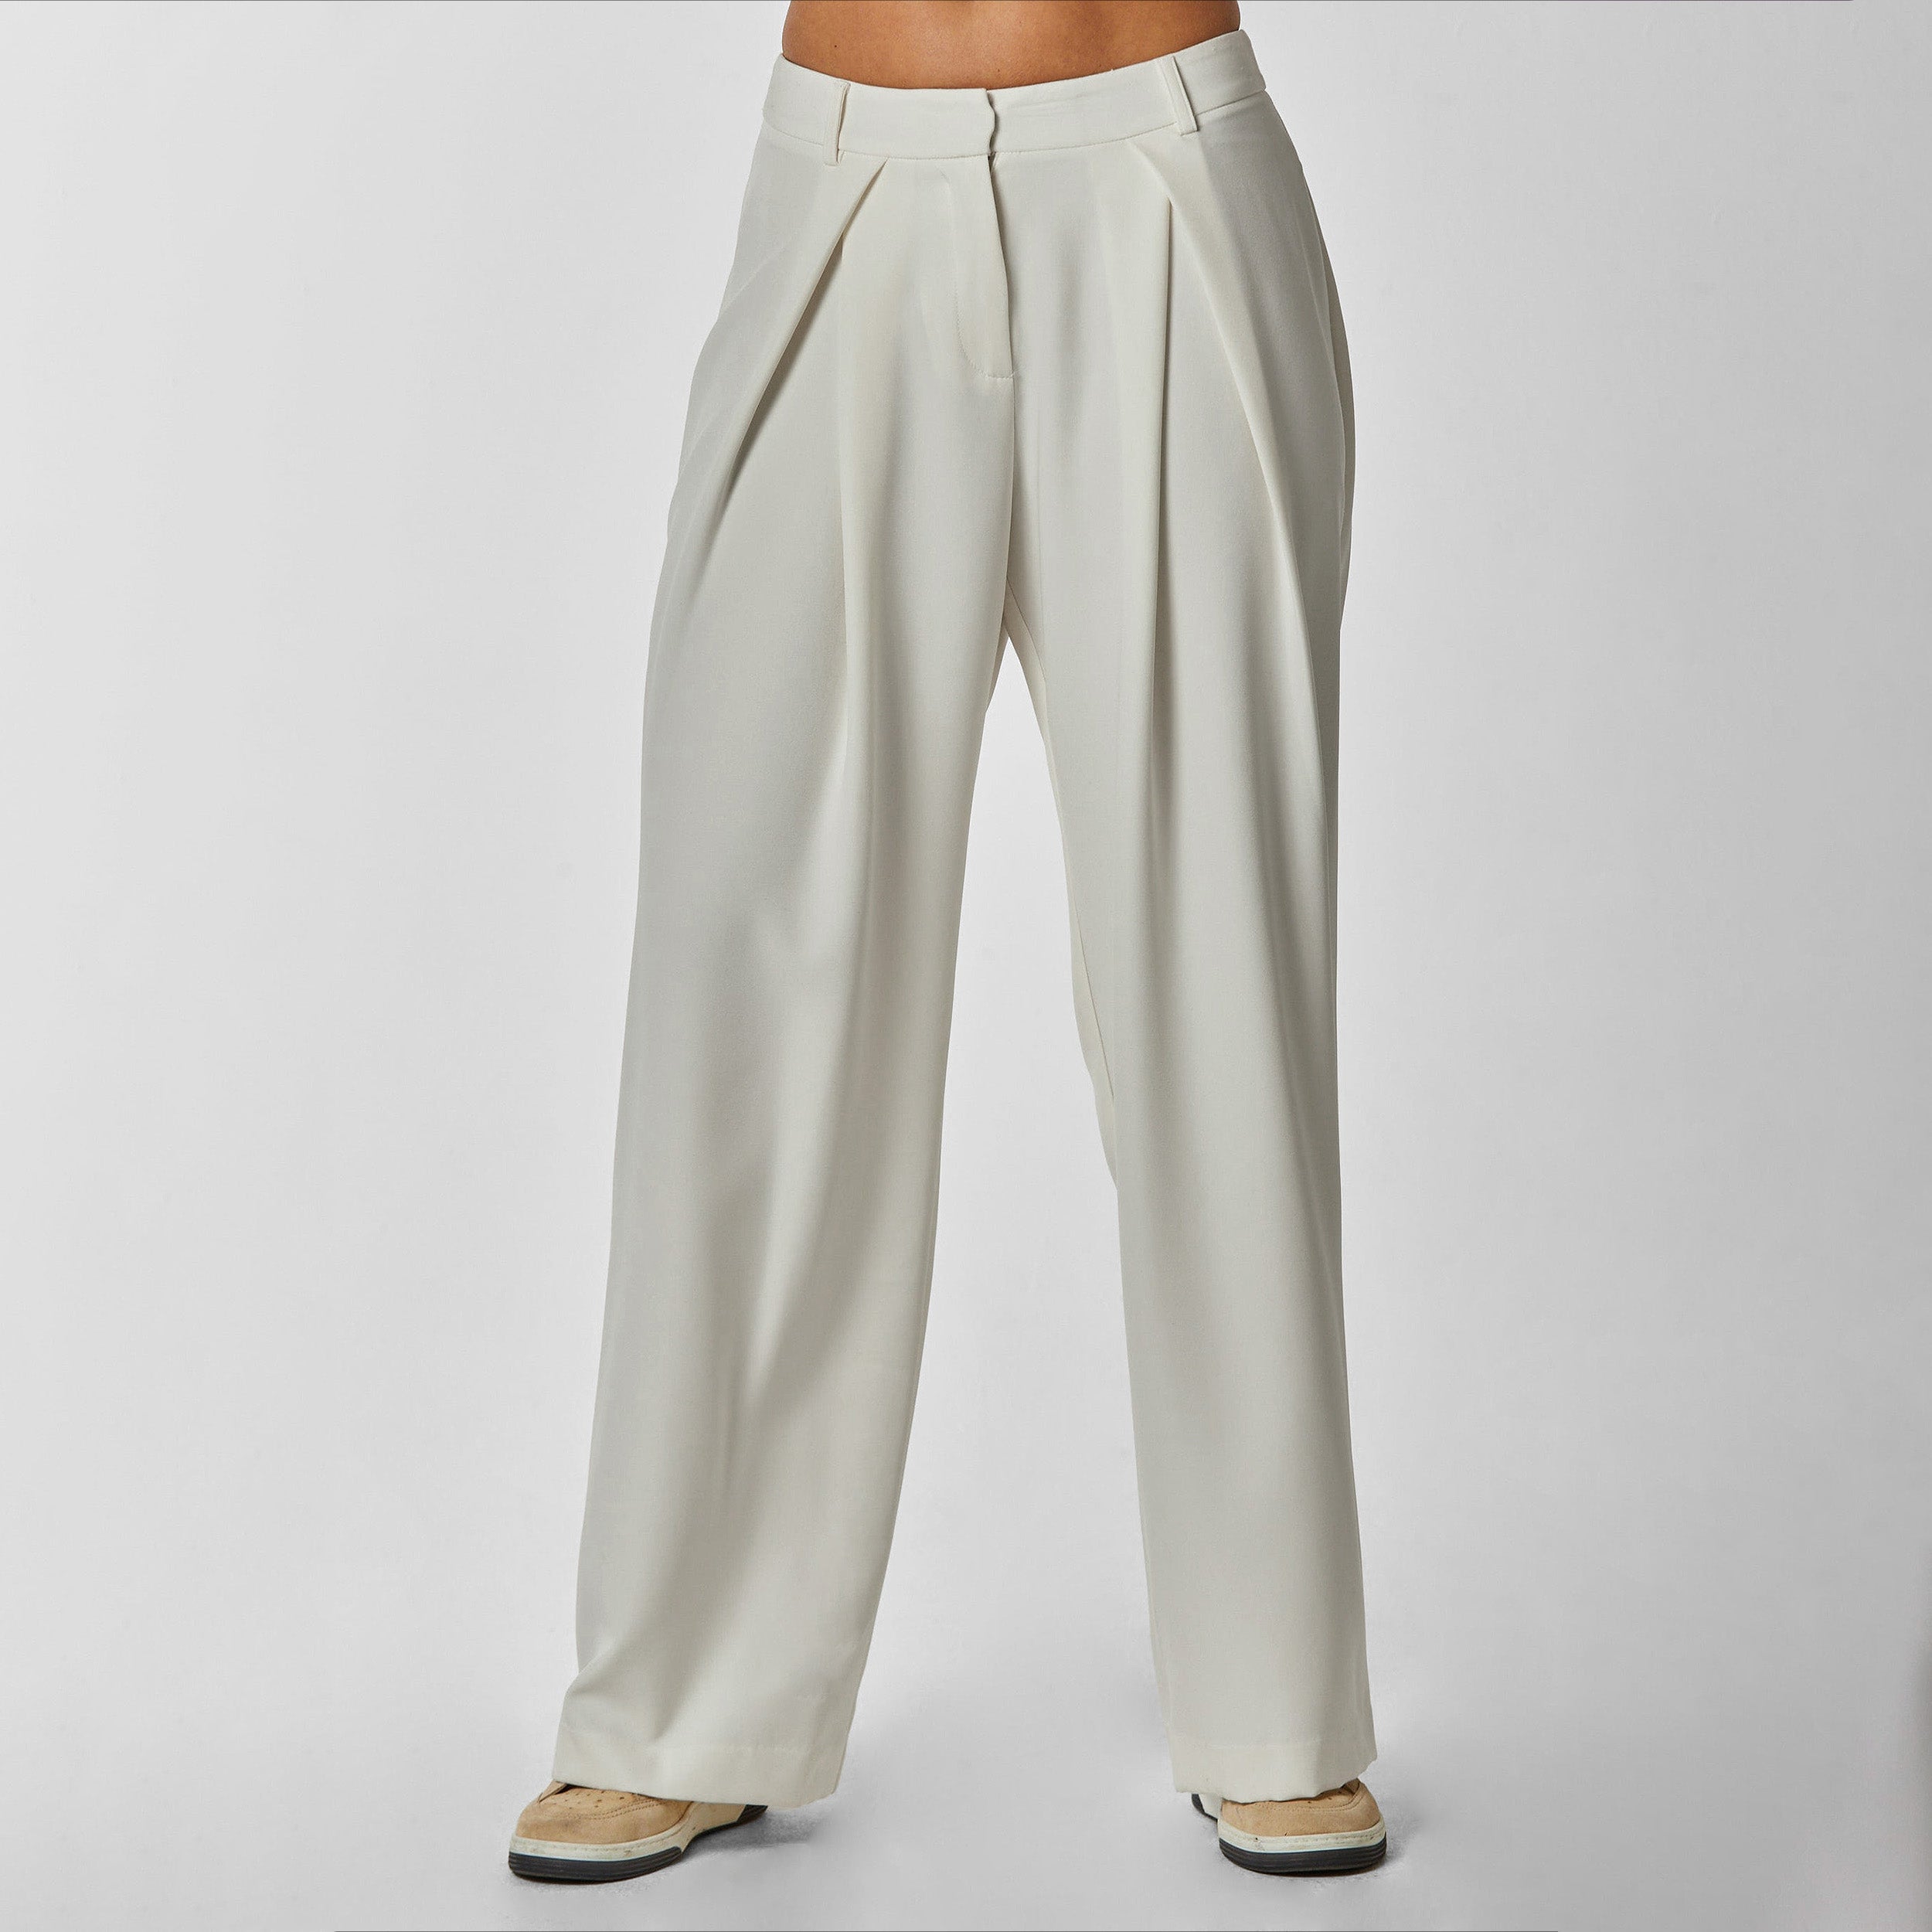 Front view of woman wearing pleated cream colored trousers with stretch fabric